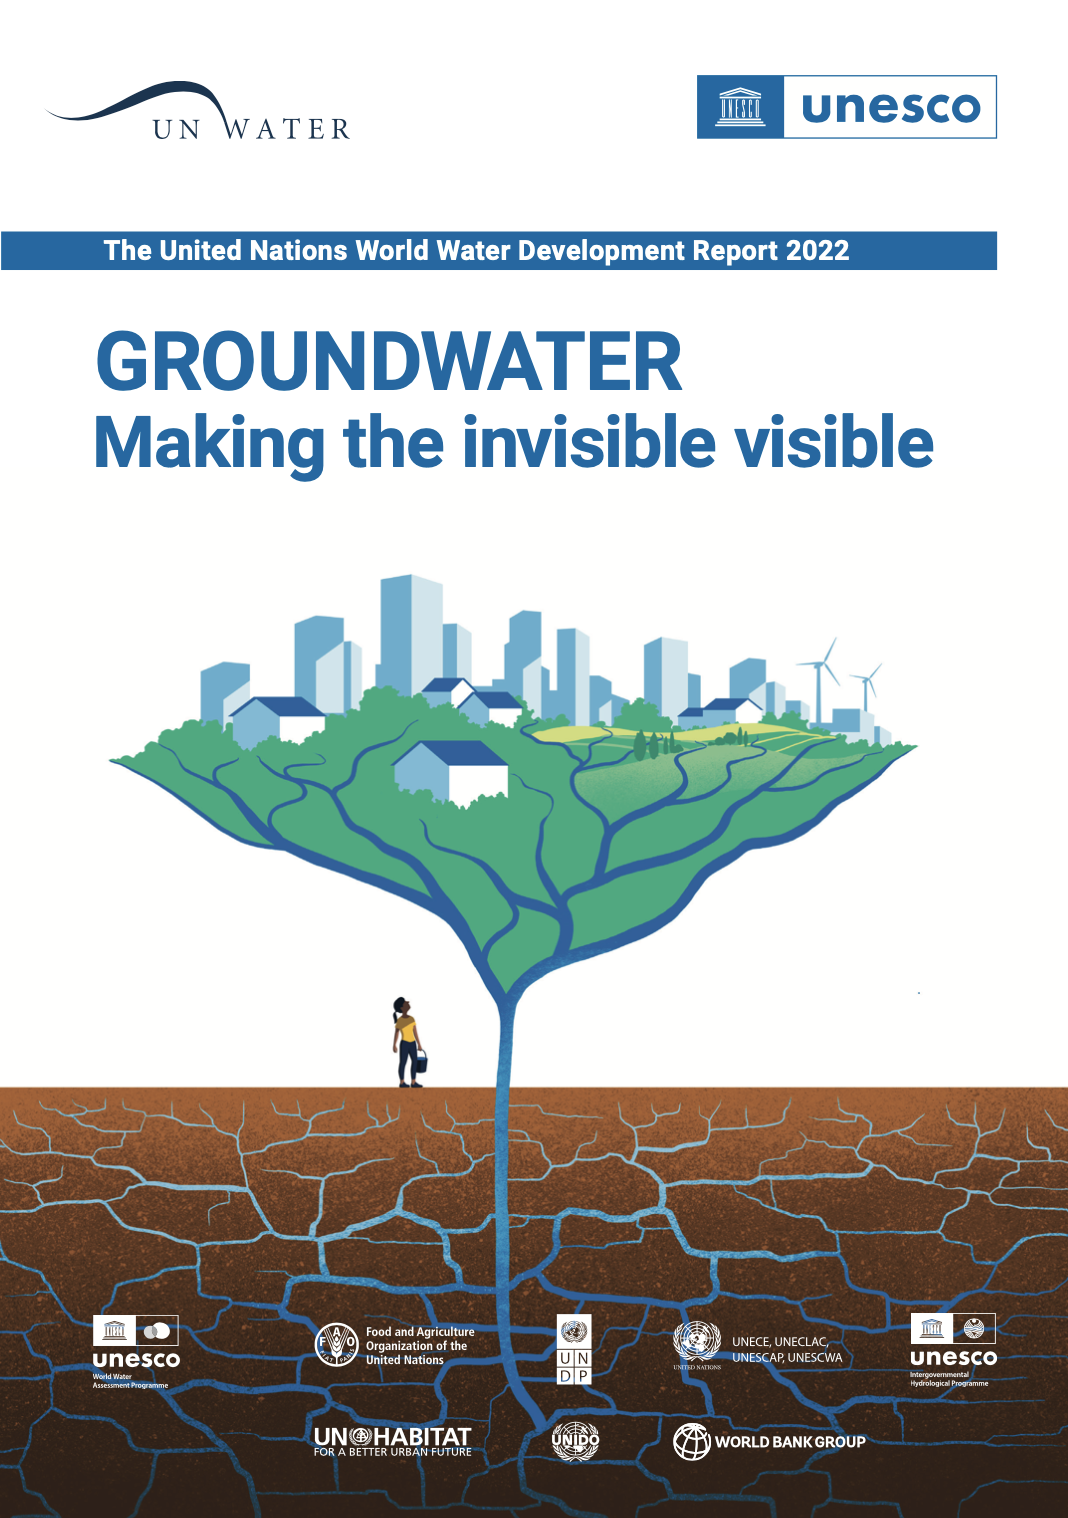 The United Nations World Water Development Report 2022 Groundwater Making the invisible